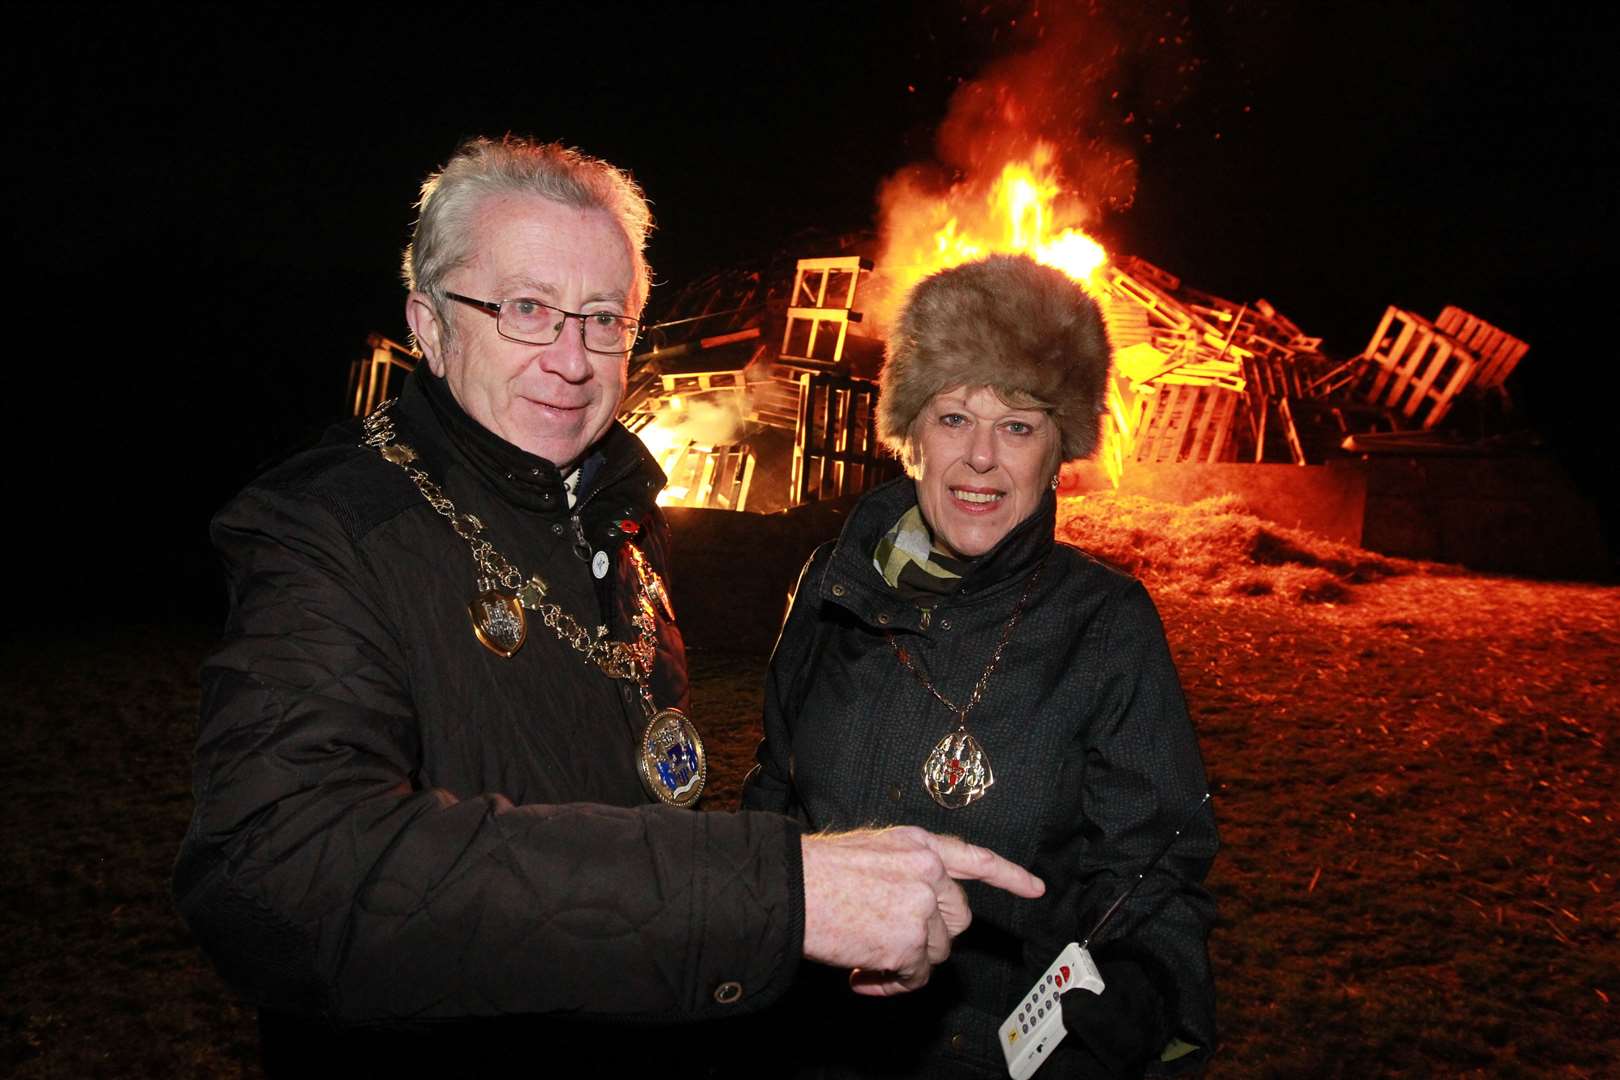 Cllr Steve Ilse with his wife Cllr Josie Iles on fireworks night at the Great Lines in Gillingham in 2018